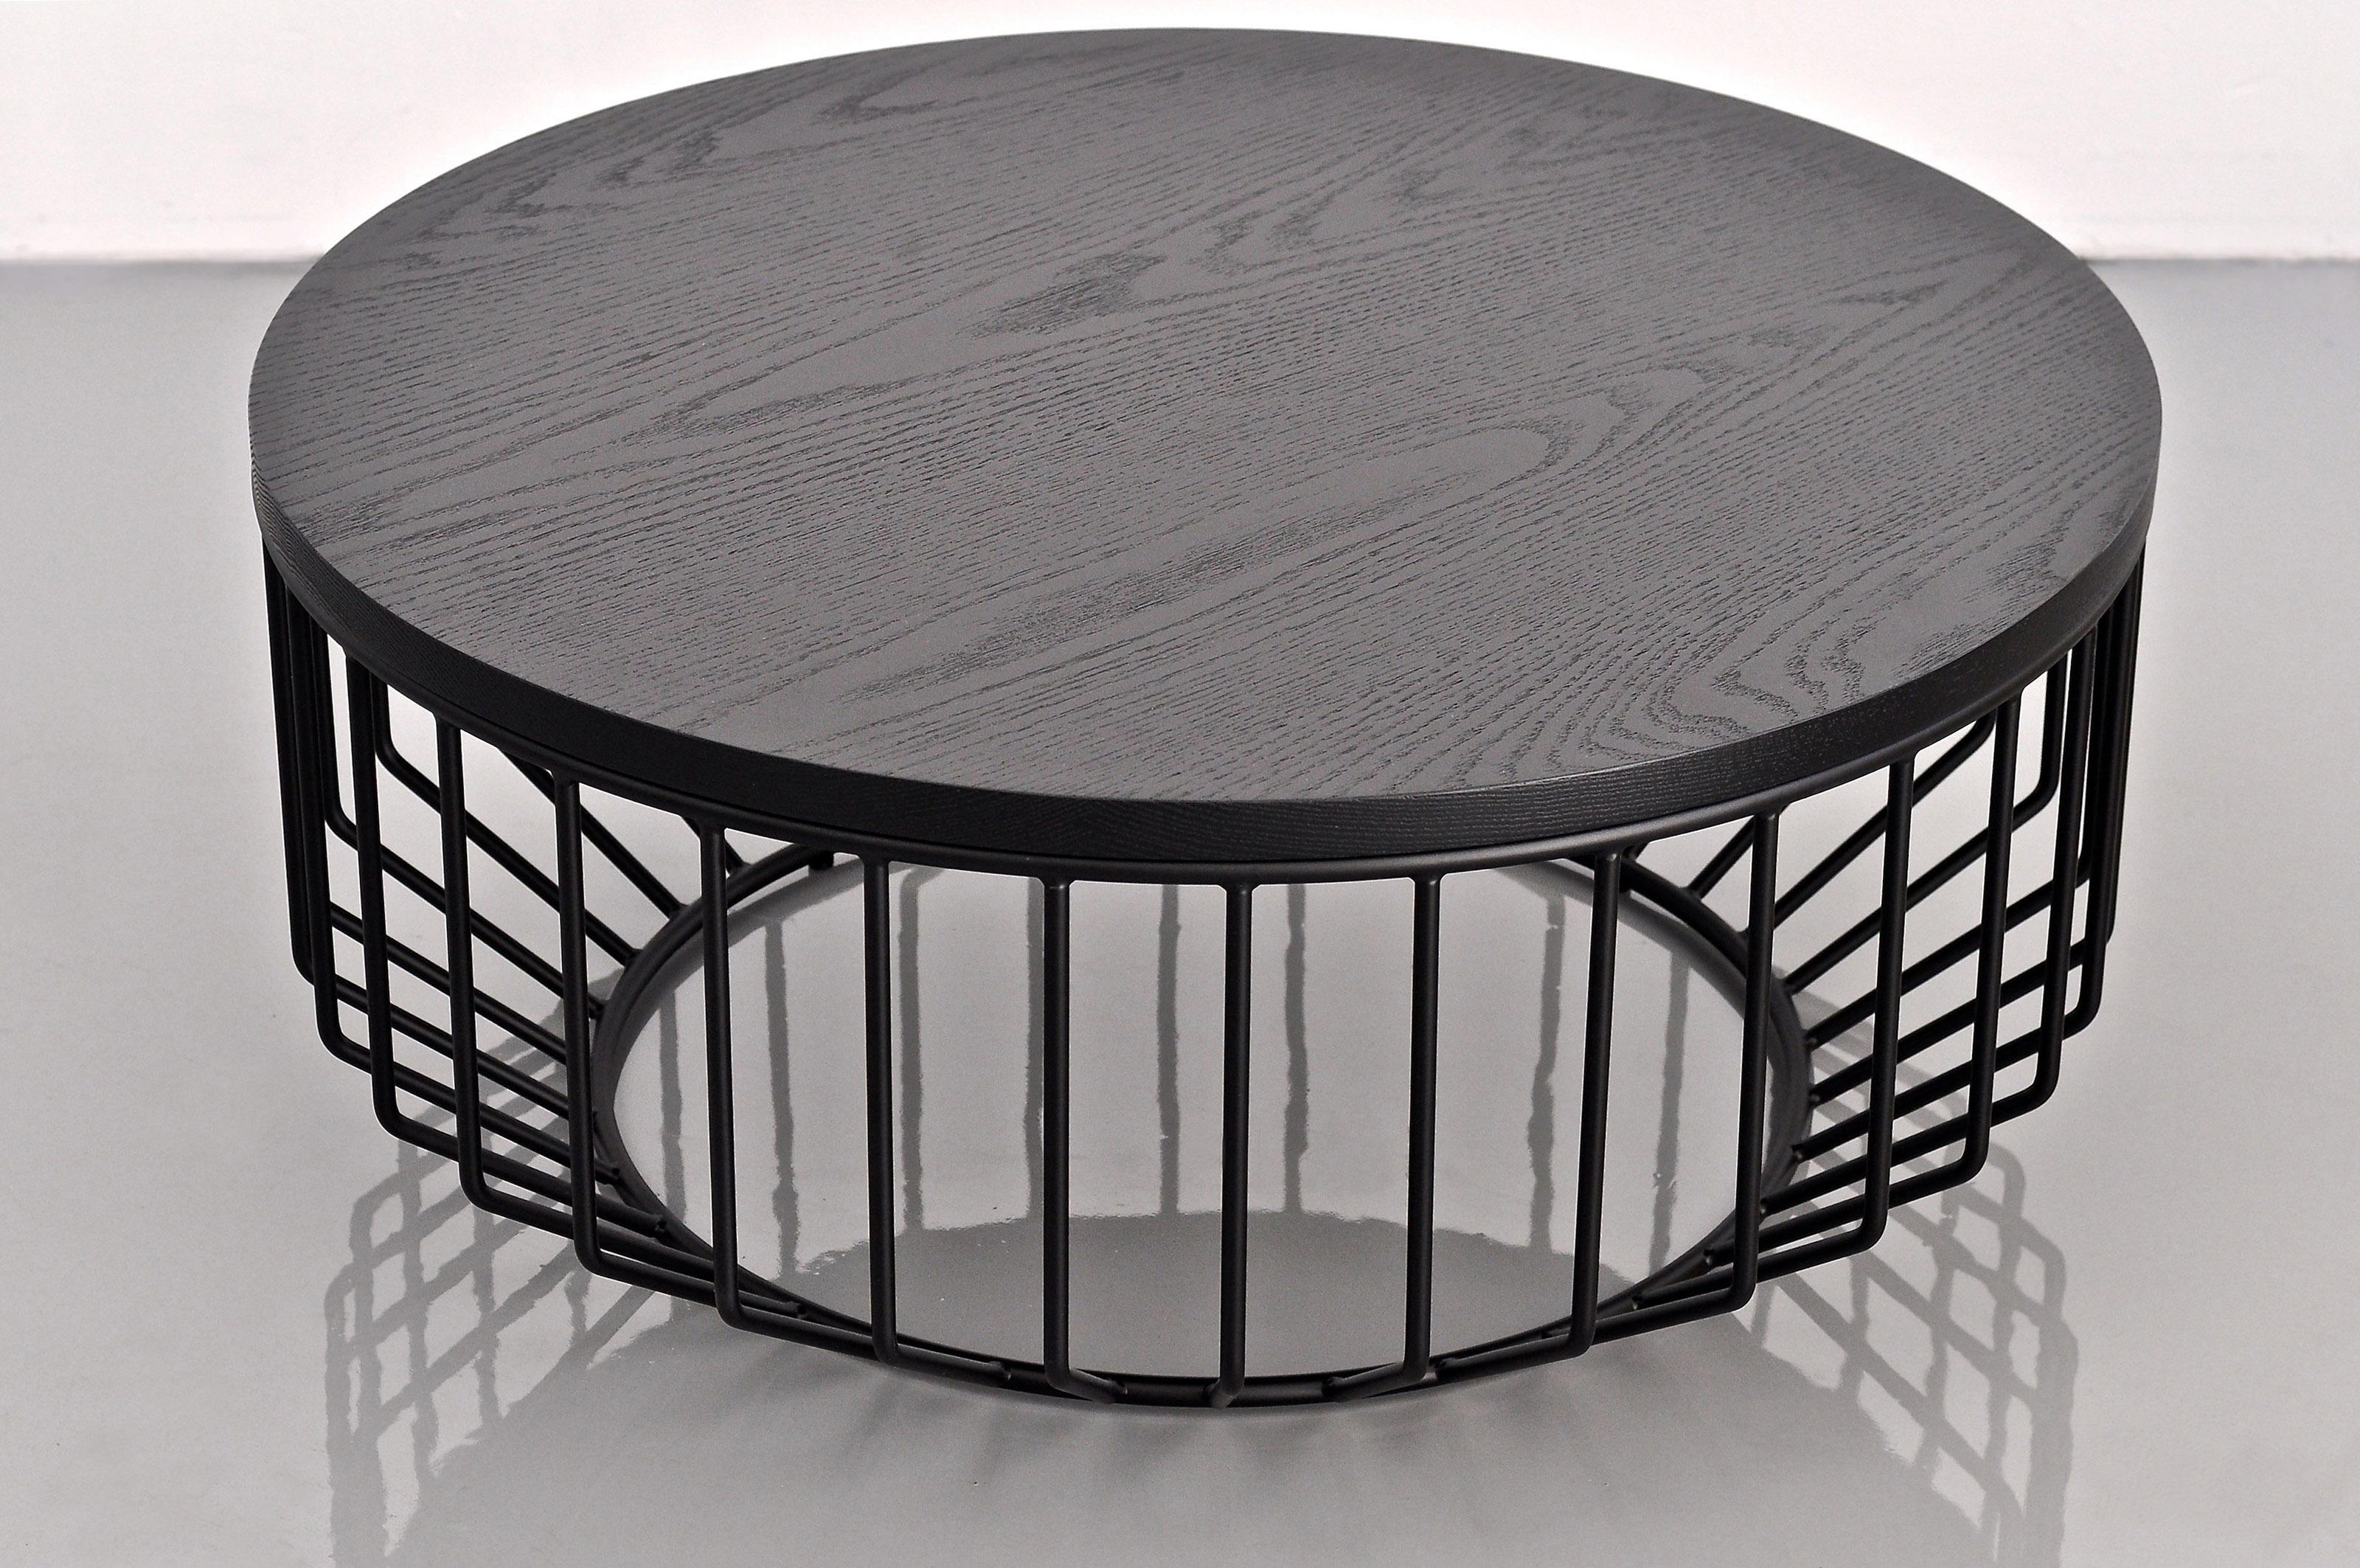 Powder-Coated Wired Coffee Table by Phase Design For Sale